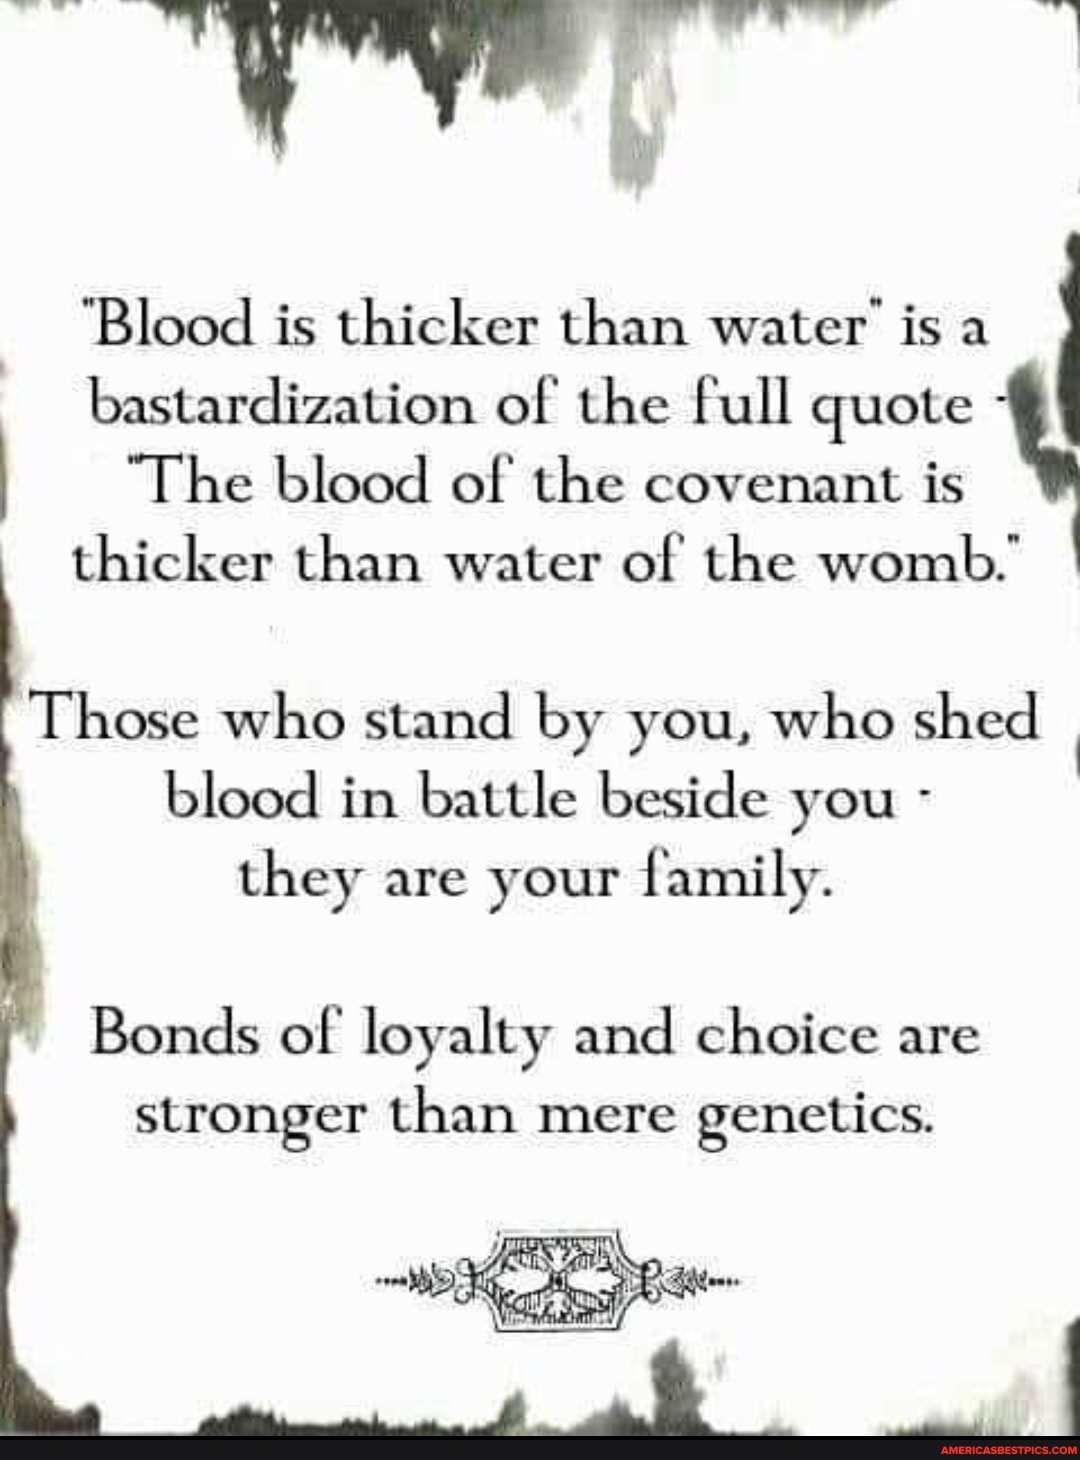 Blood Is Thicker Than Water' Is A Bastardization Of The Full Quote "The Blood Of The